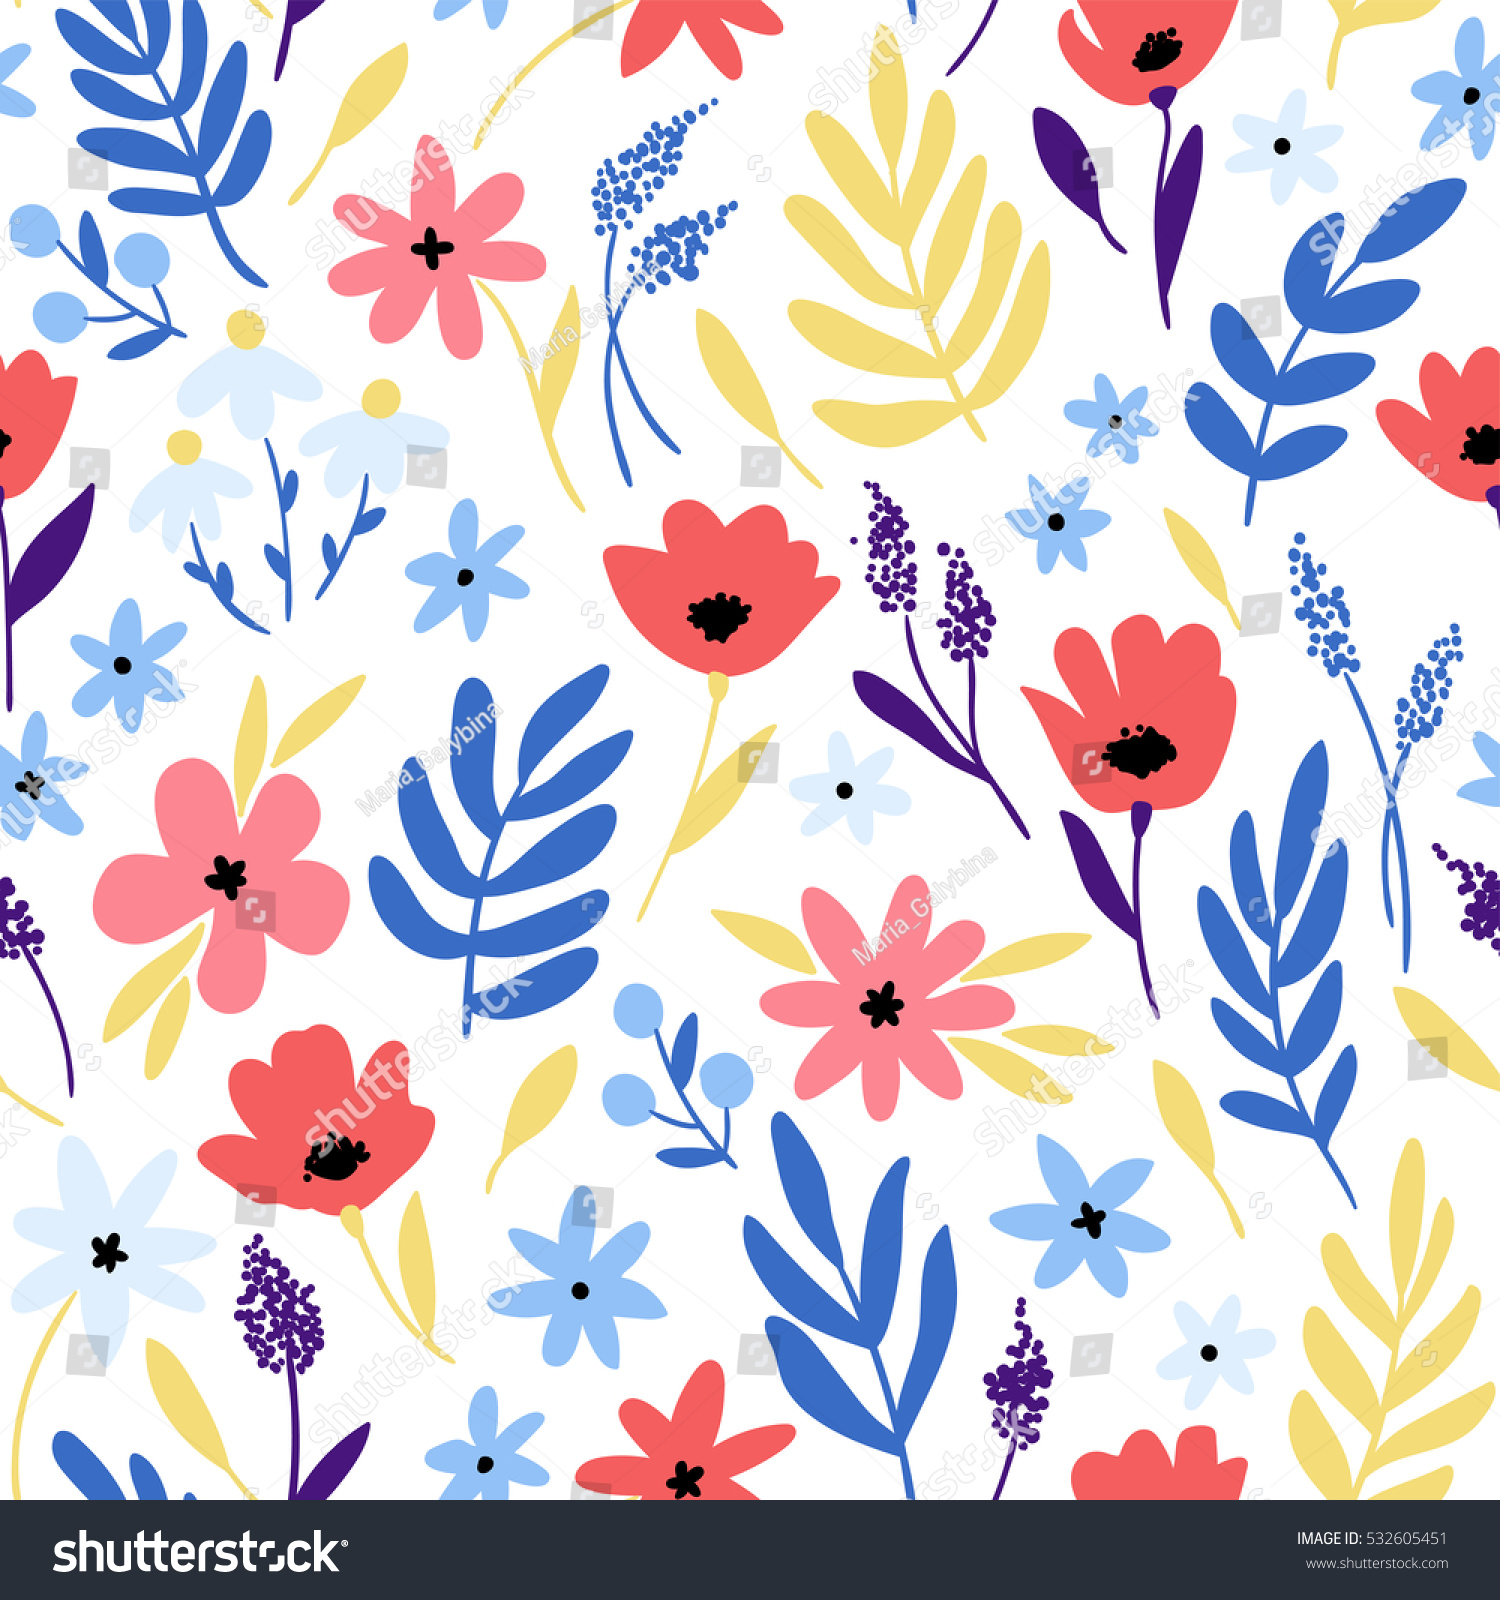 Vector Floral Pattern With Flowers And Leaves. Gentle, Spring